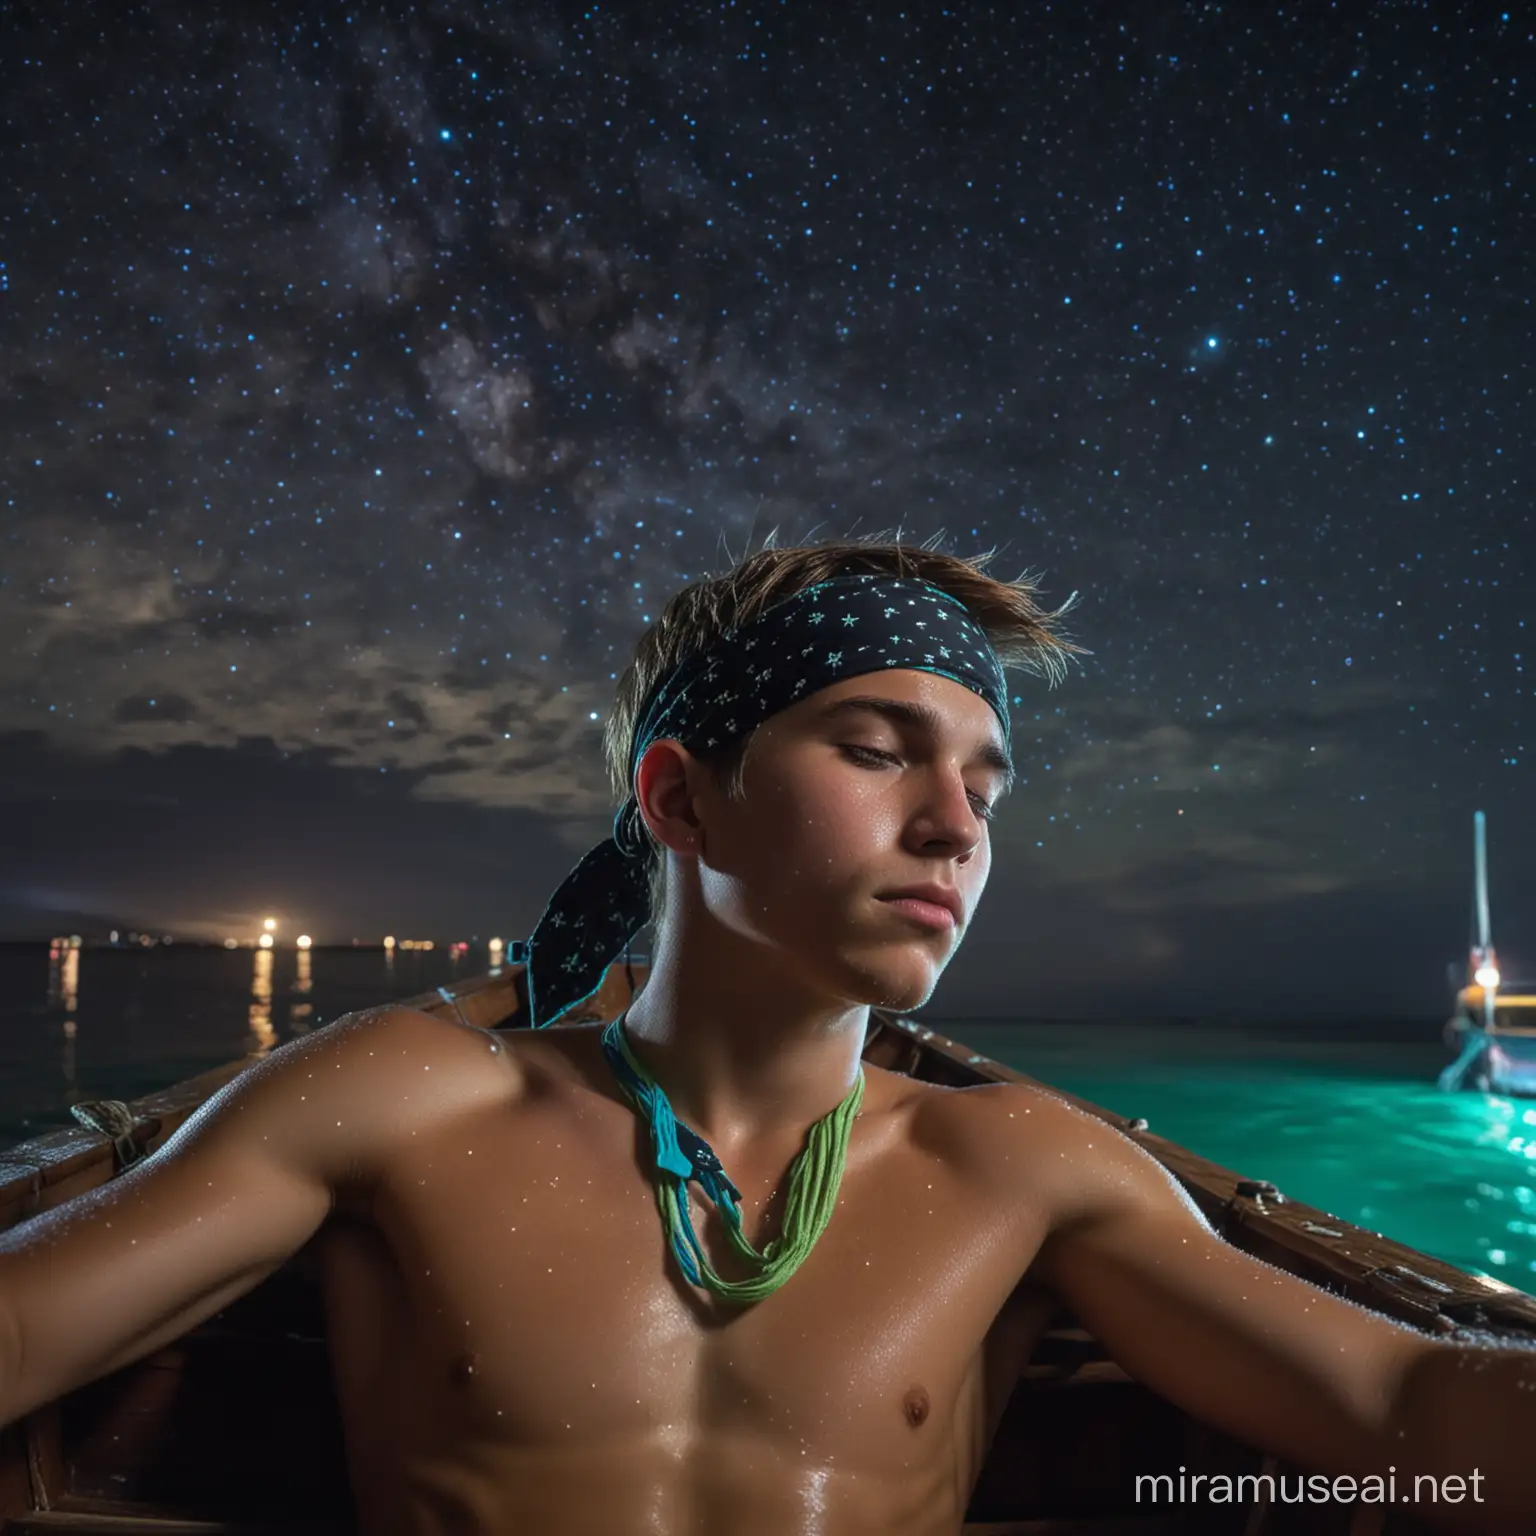 Sensual Teen Pirate Boy Resting on Pirate Ship Deck at Night on Heavenly Island